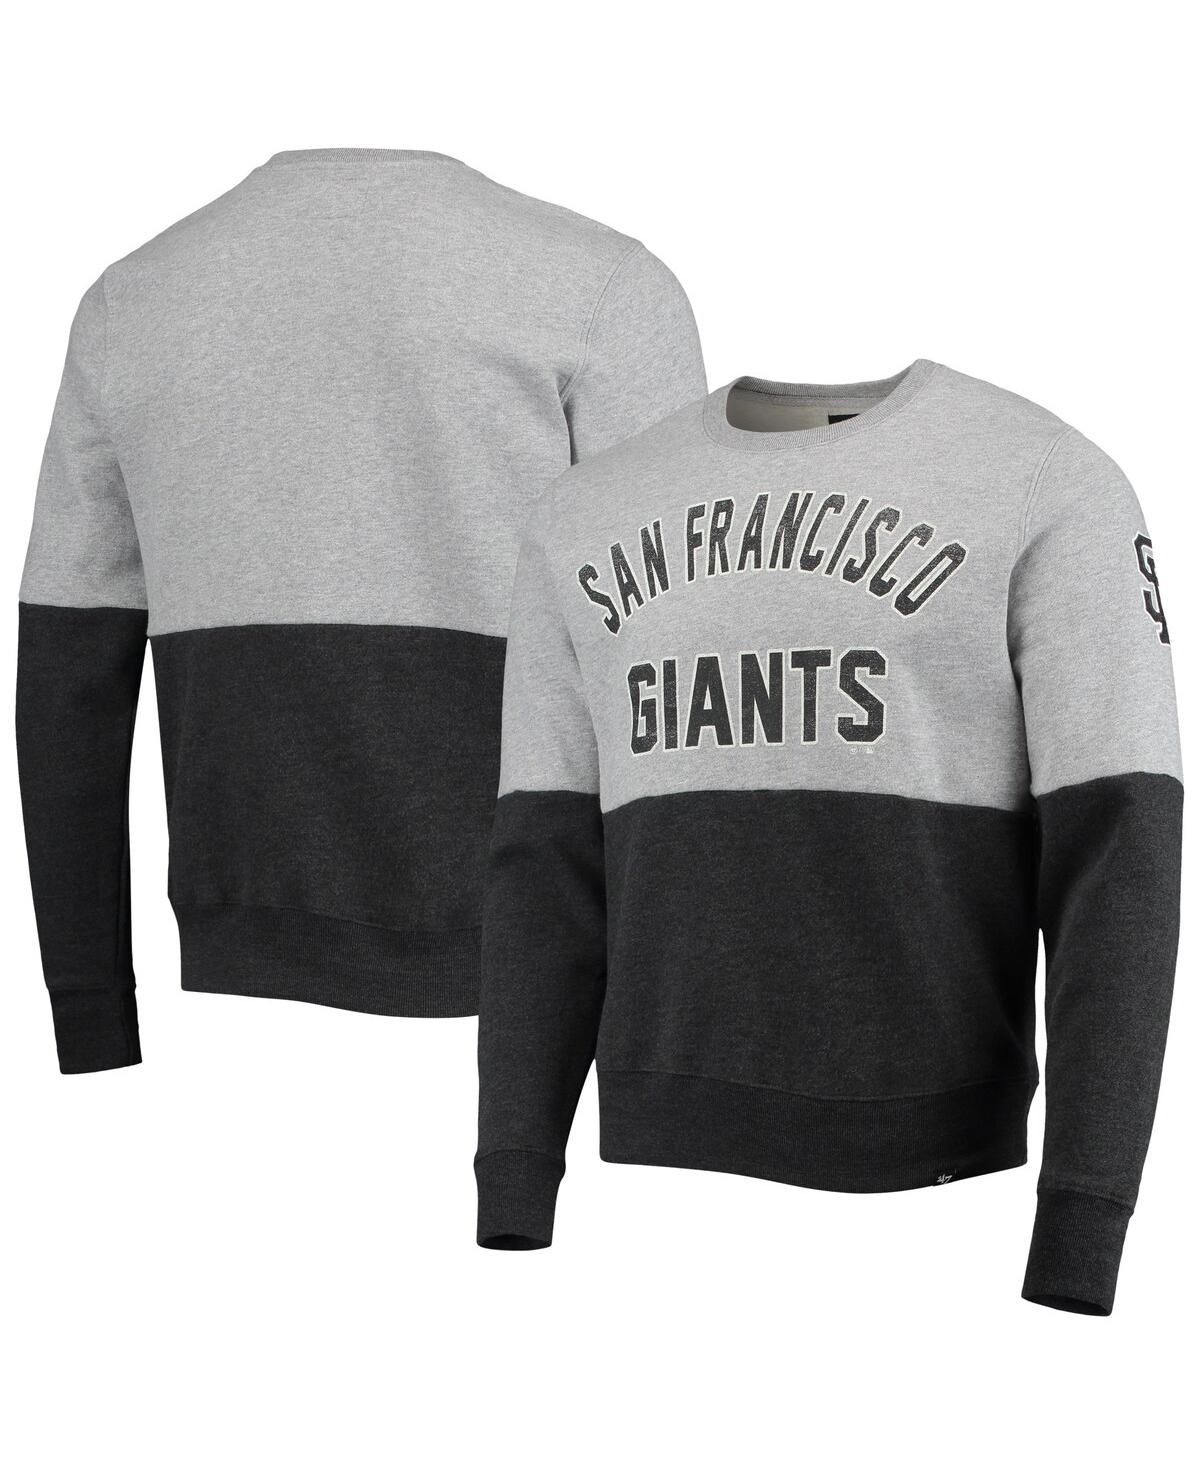 Men's '47 Heathered Gray and Heathered Black San Francisco Giants Two-Toned Team Pullover Sweatshirt - Heathered Gray, Heathered Black